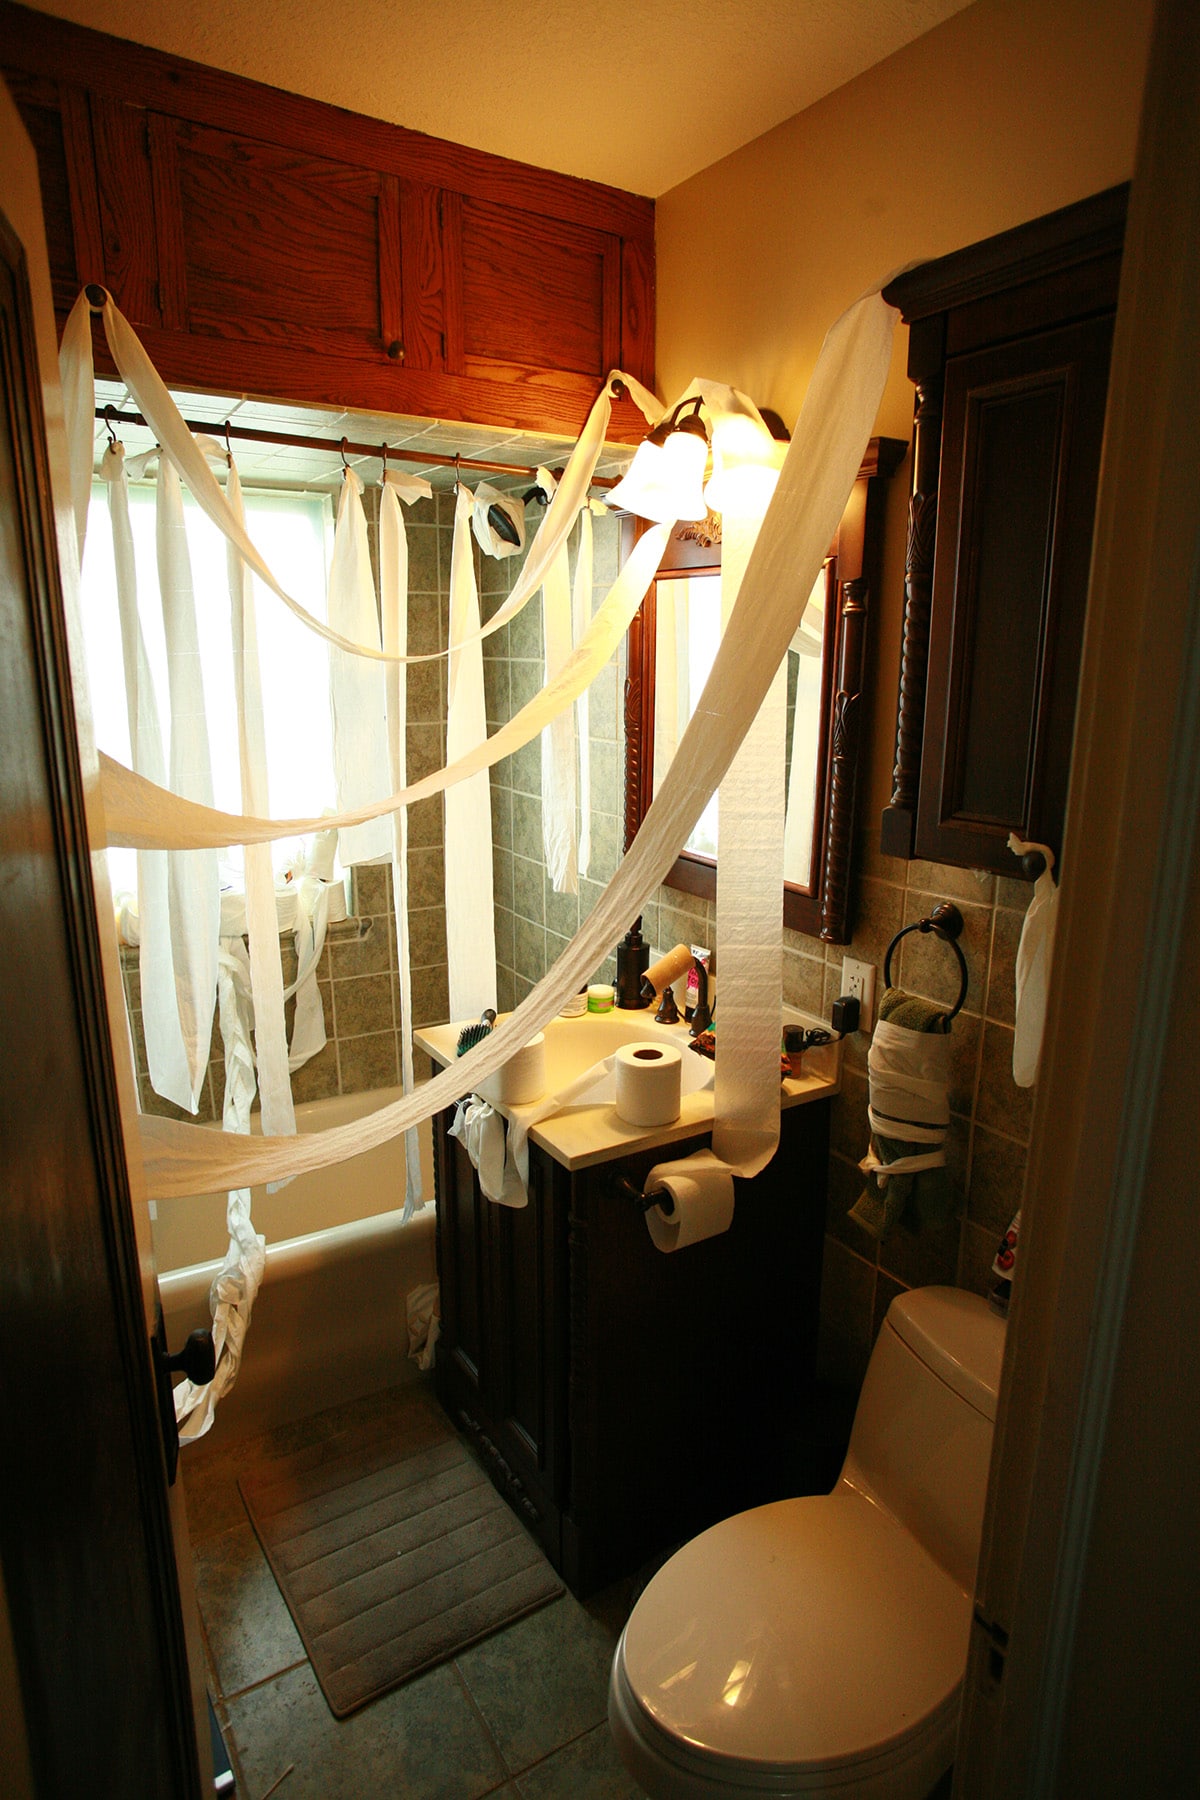 Many strands of toilet paper draped over the bathrom vanity and shower.